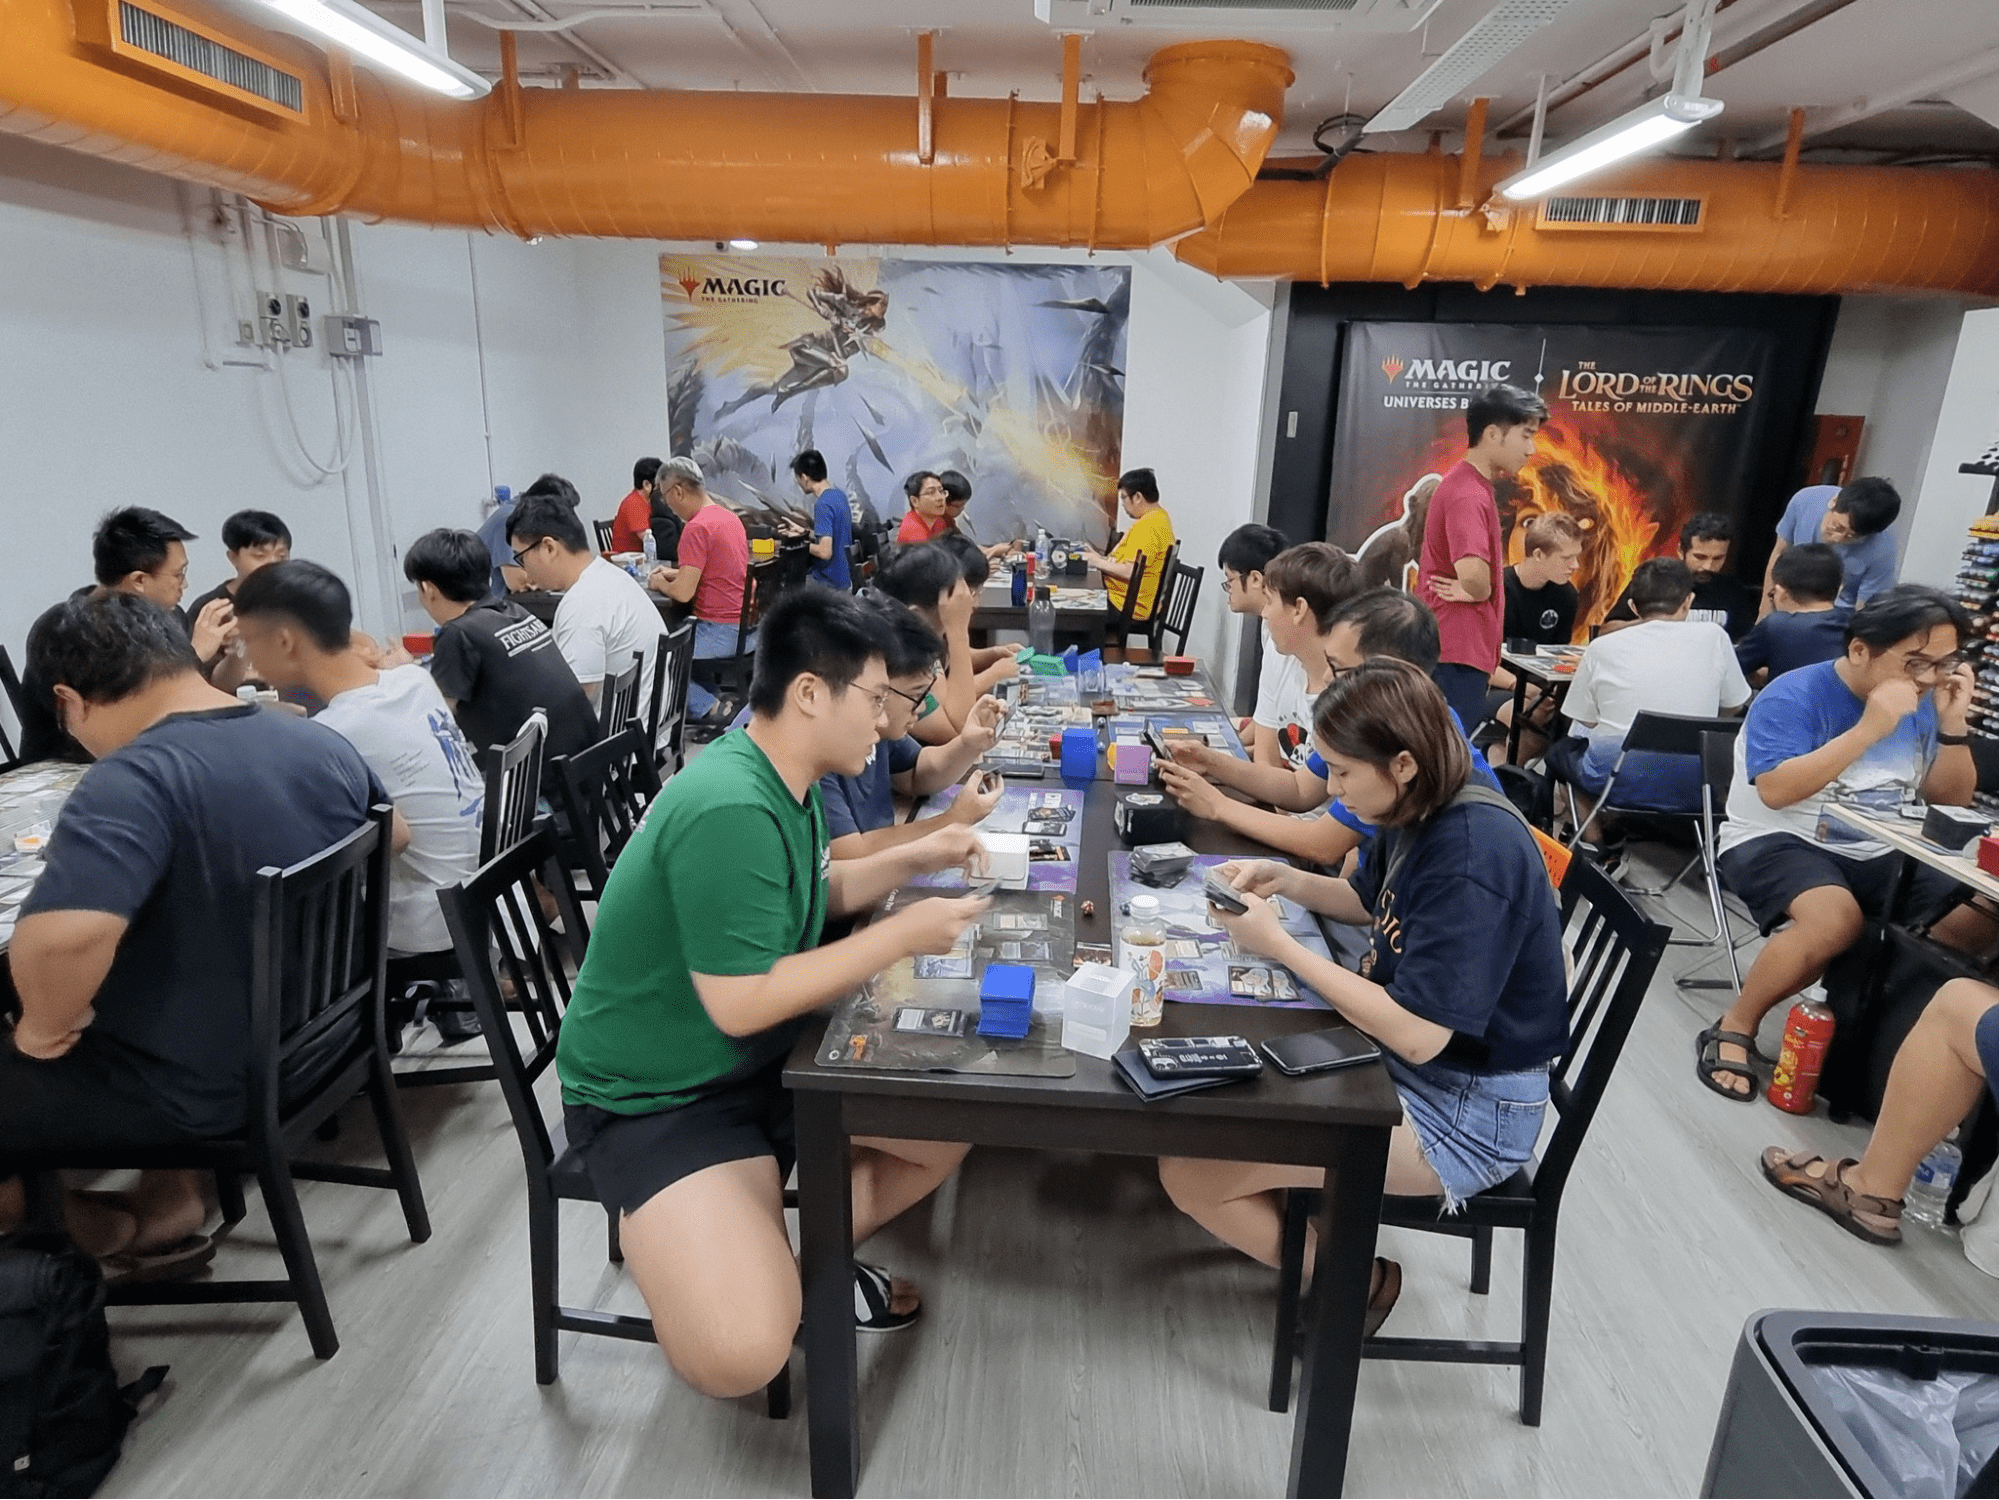 Dueller's Point - Customers Playing Magic The Gathering